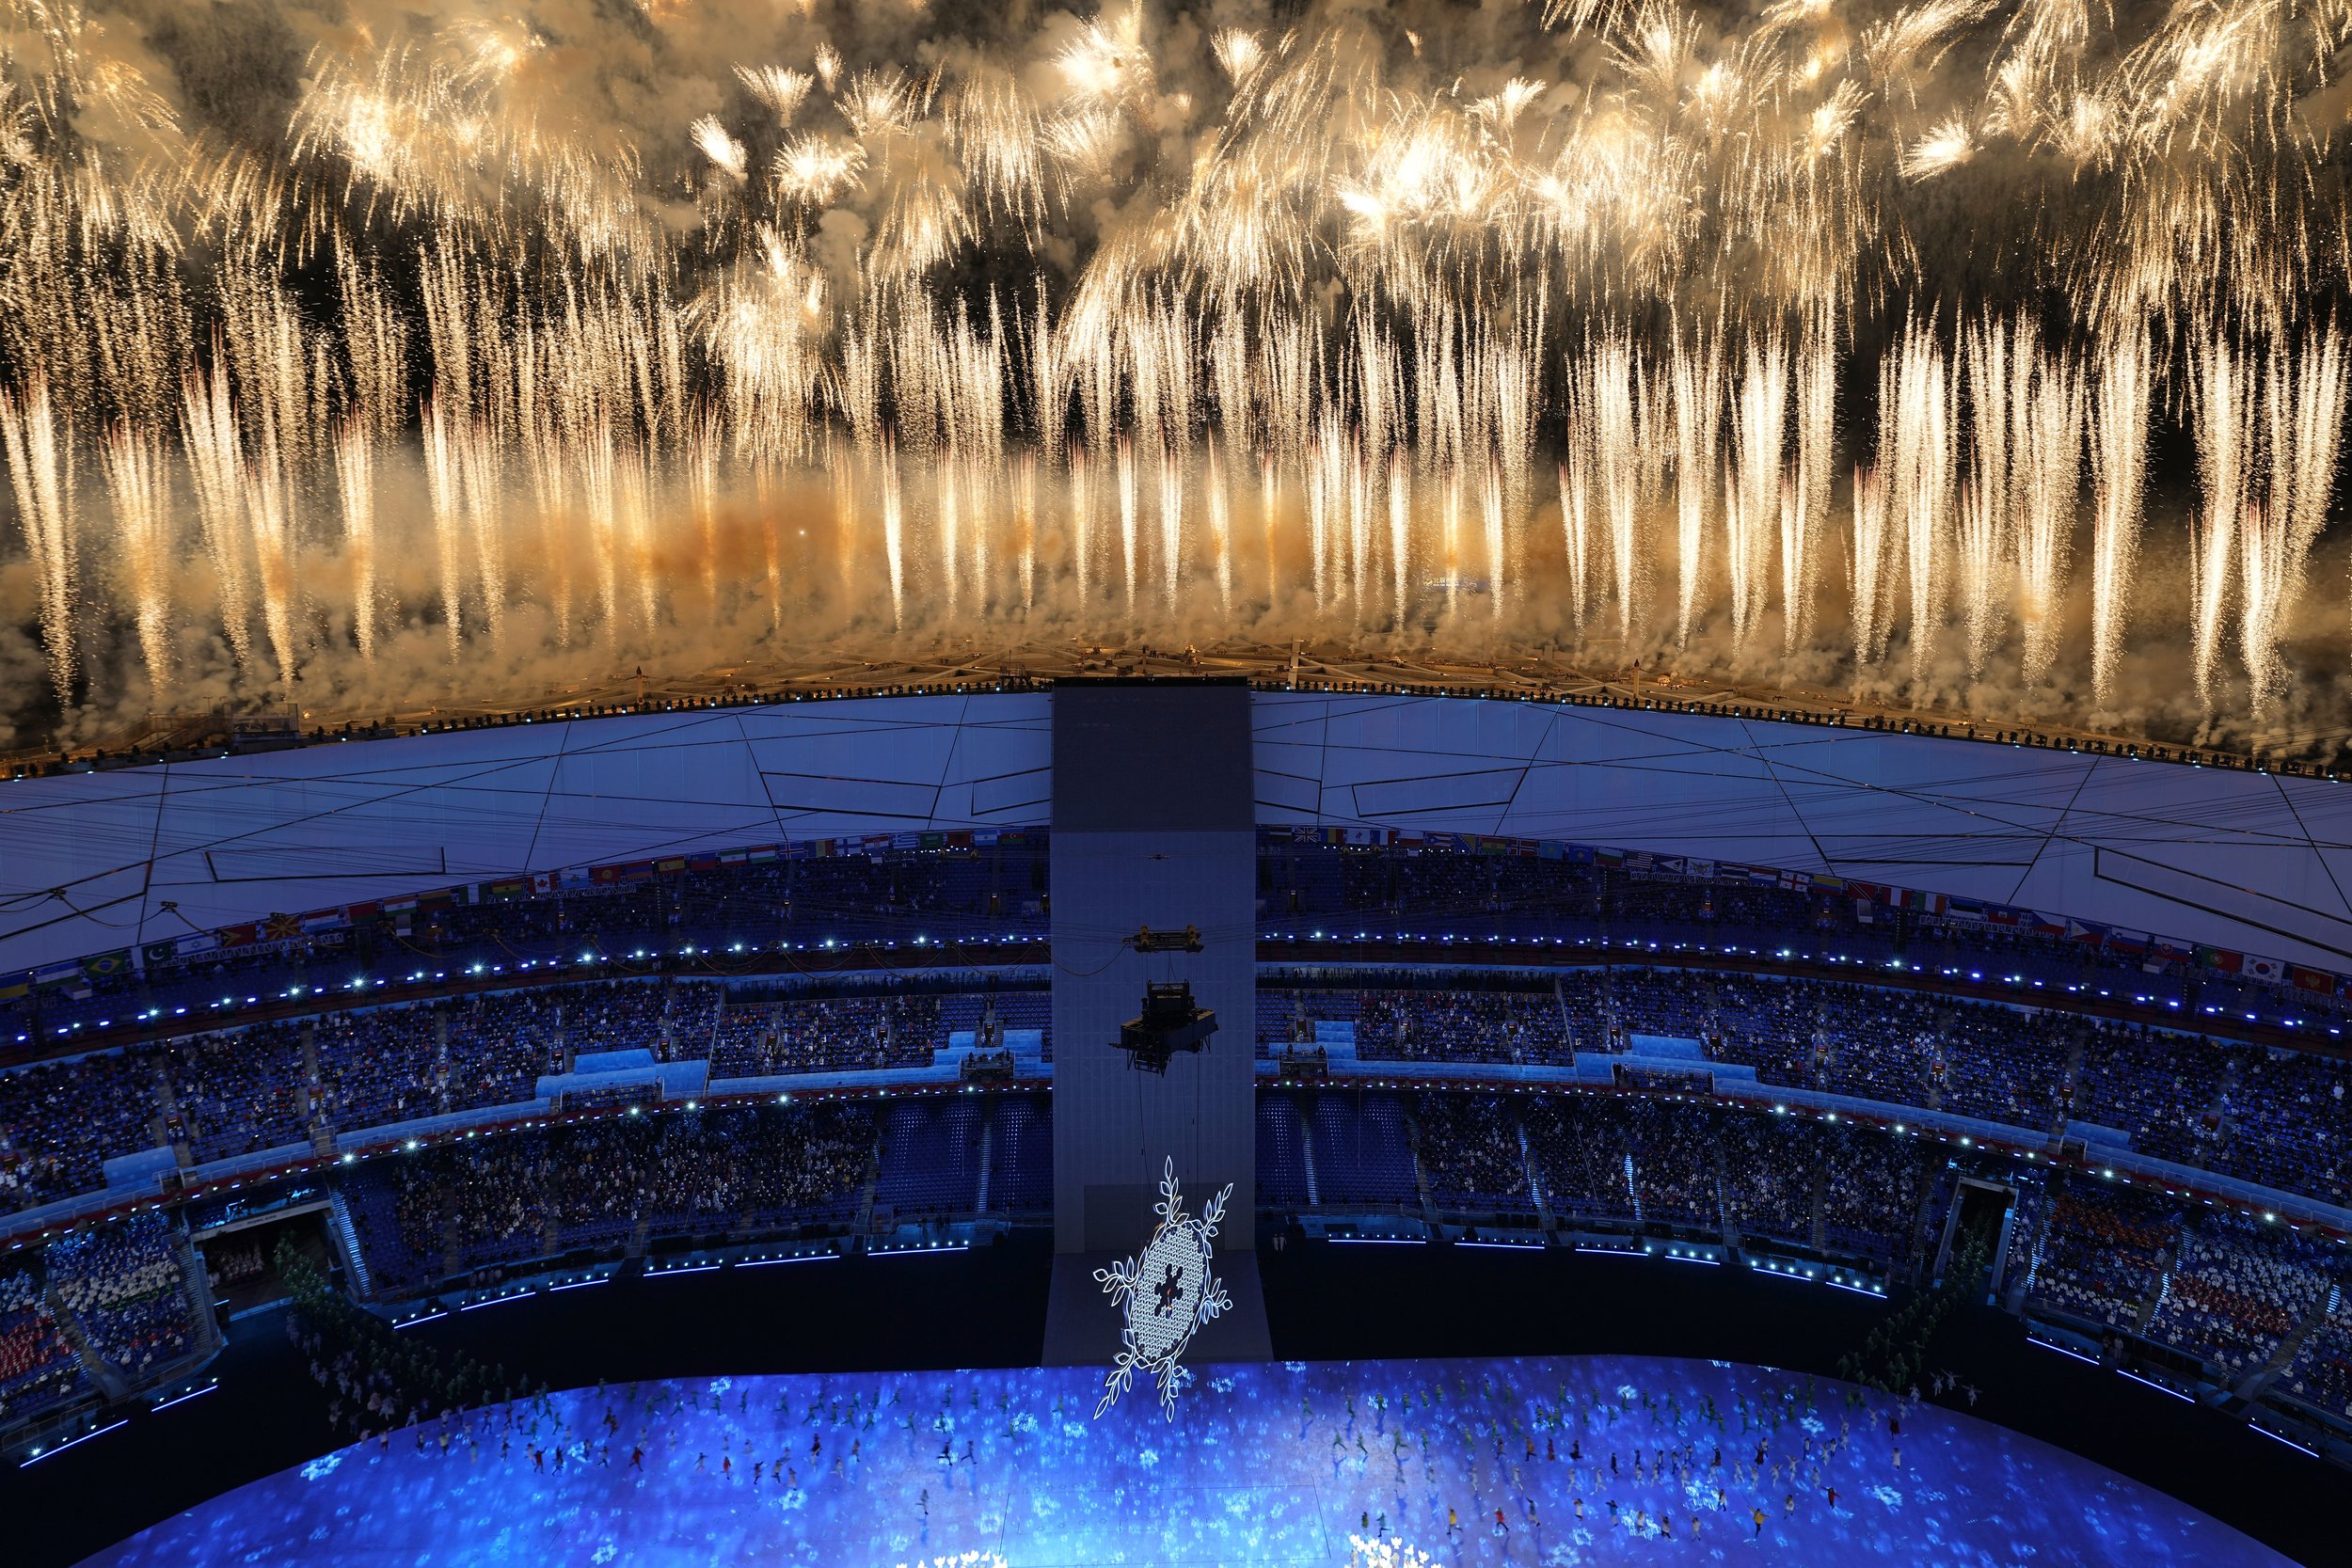  Fireworks light up the sky over Olympic Stadium during the opening ceremony of the 2022 Winter Olympics, Friday, Feb. 4, 2022, in Beijing. (AP Photo/Jeff Roberson) 